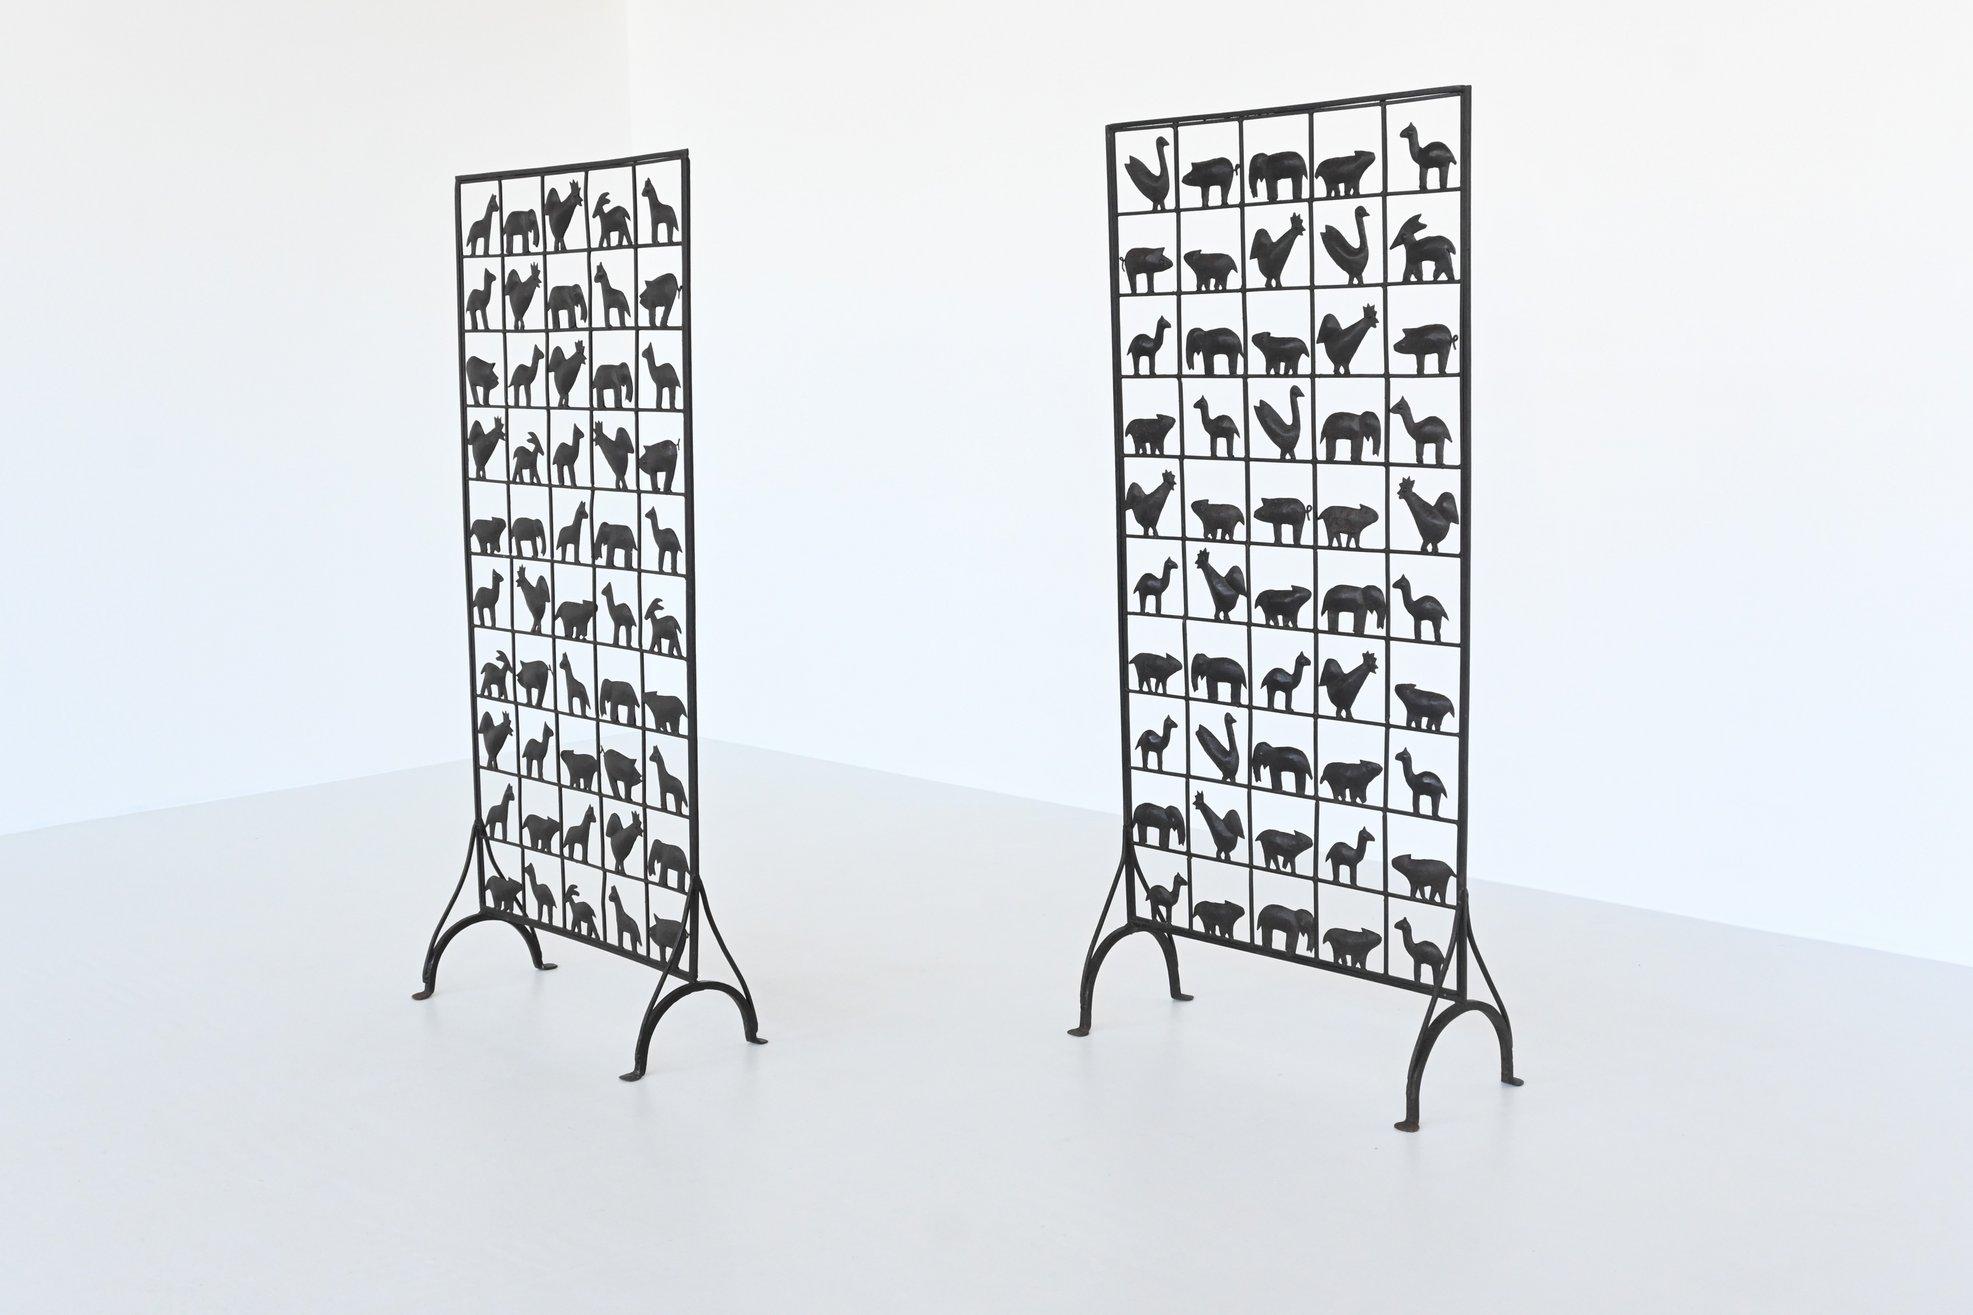 Beautiful and highly decorative screens designed and manufactured by Atelier Marolles, France, 1950. These screens are made of wrought iron and decorated with 50 animal figures. Very nice to divide spaces but not completely close them. The screens